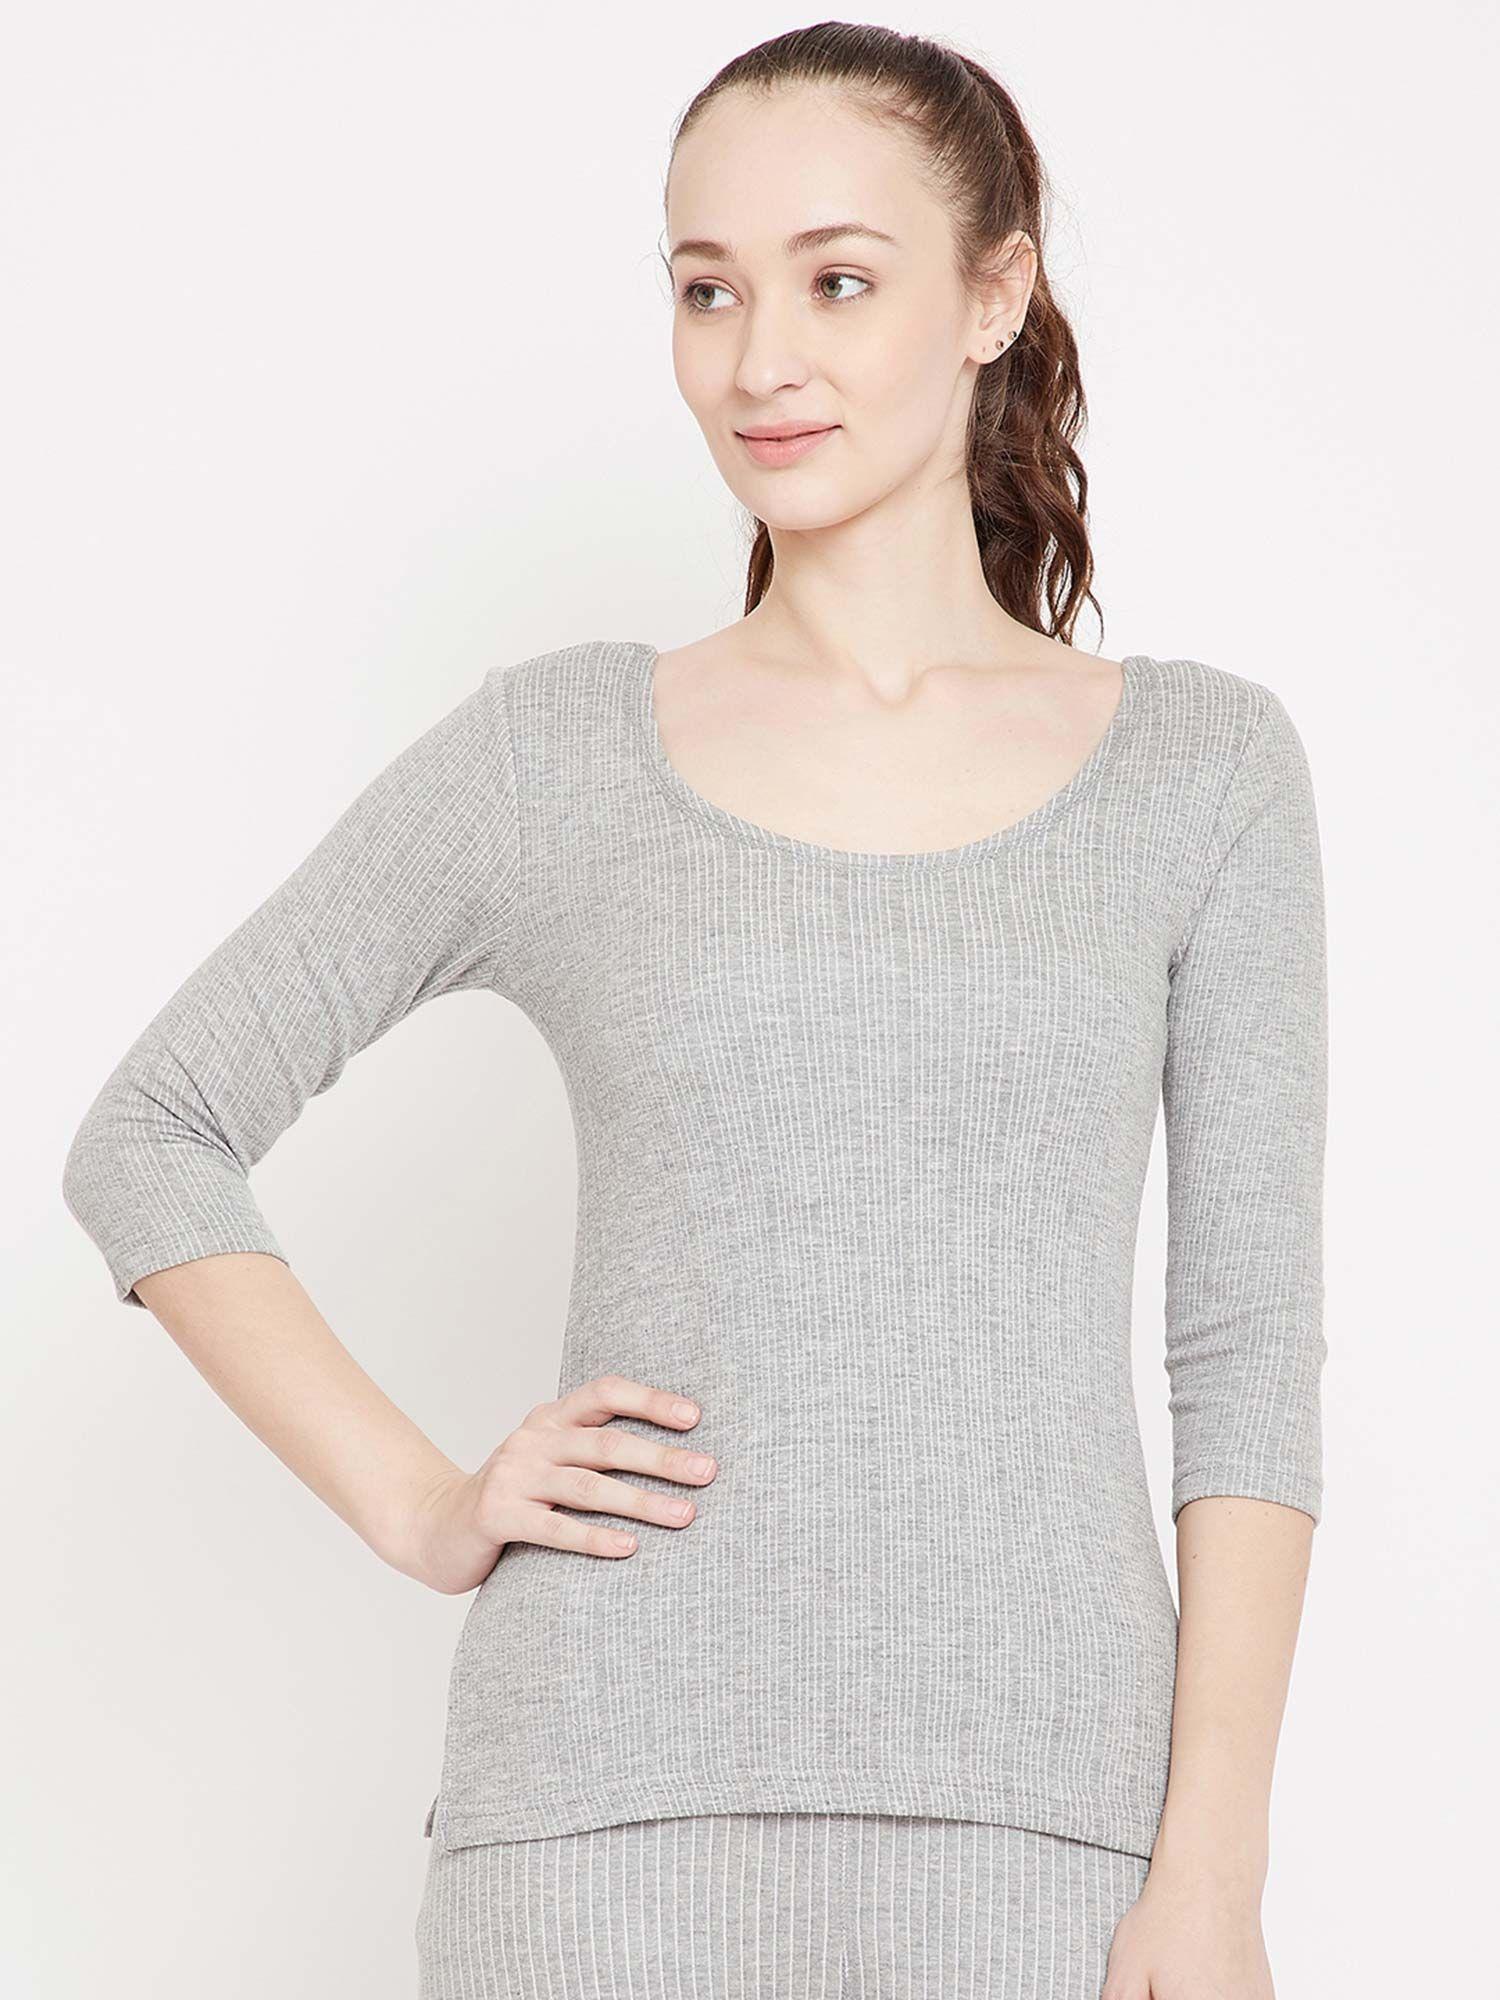 esancia round neck 3/4th sleeve milange grey thermal upper for women